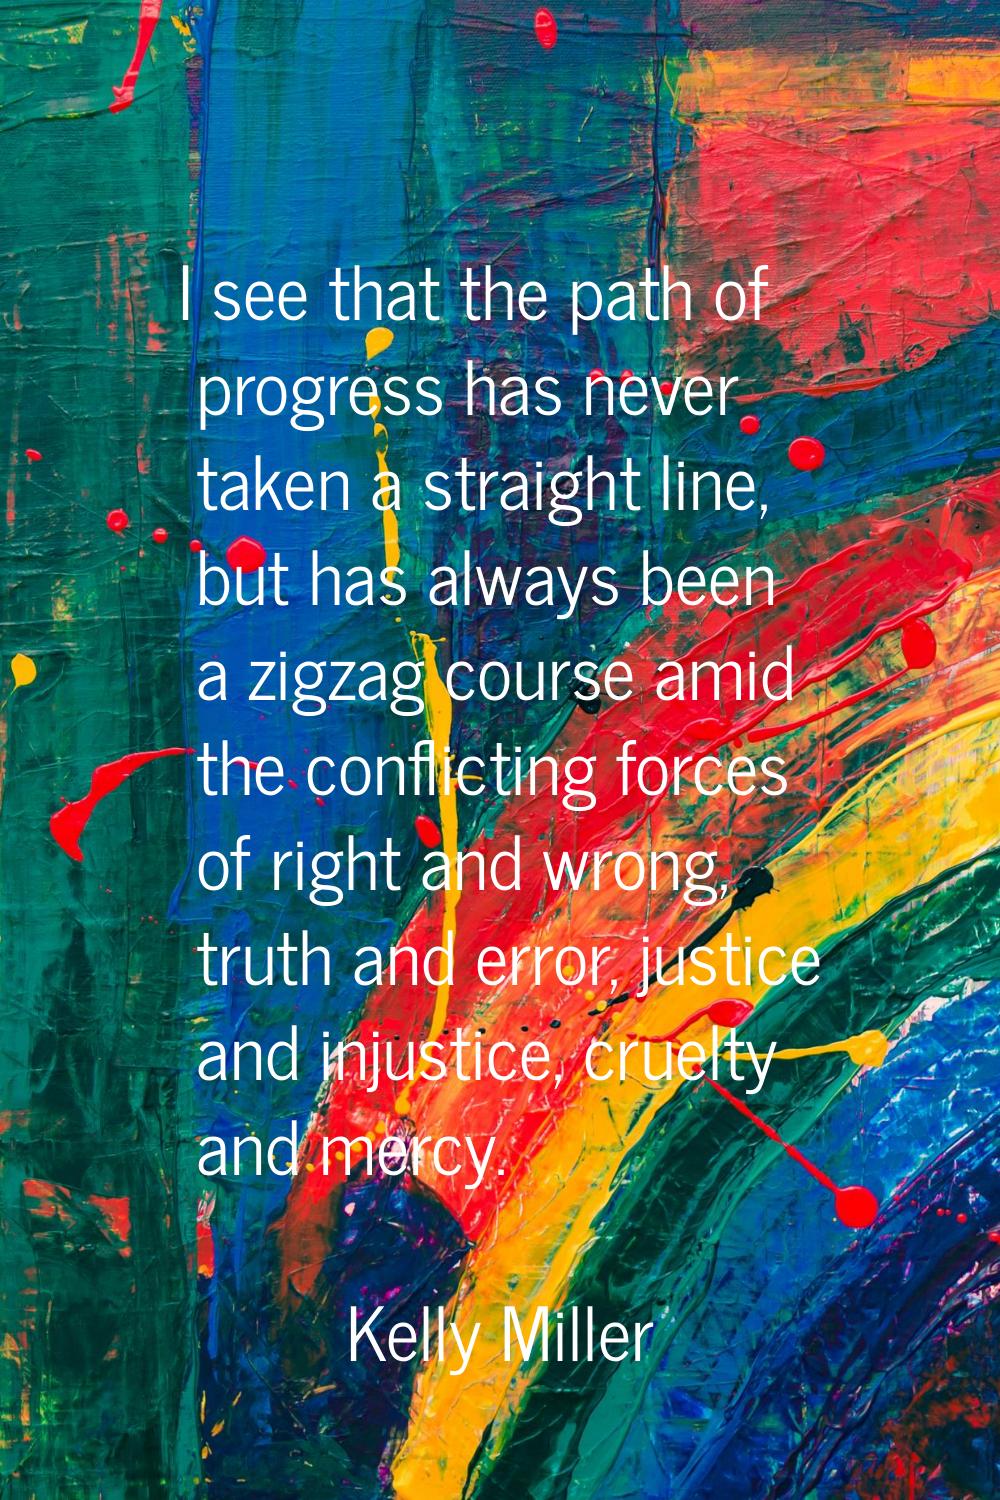 I see that the path of progress has never taken a straight line, but has always been a zigzag cours